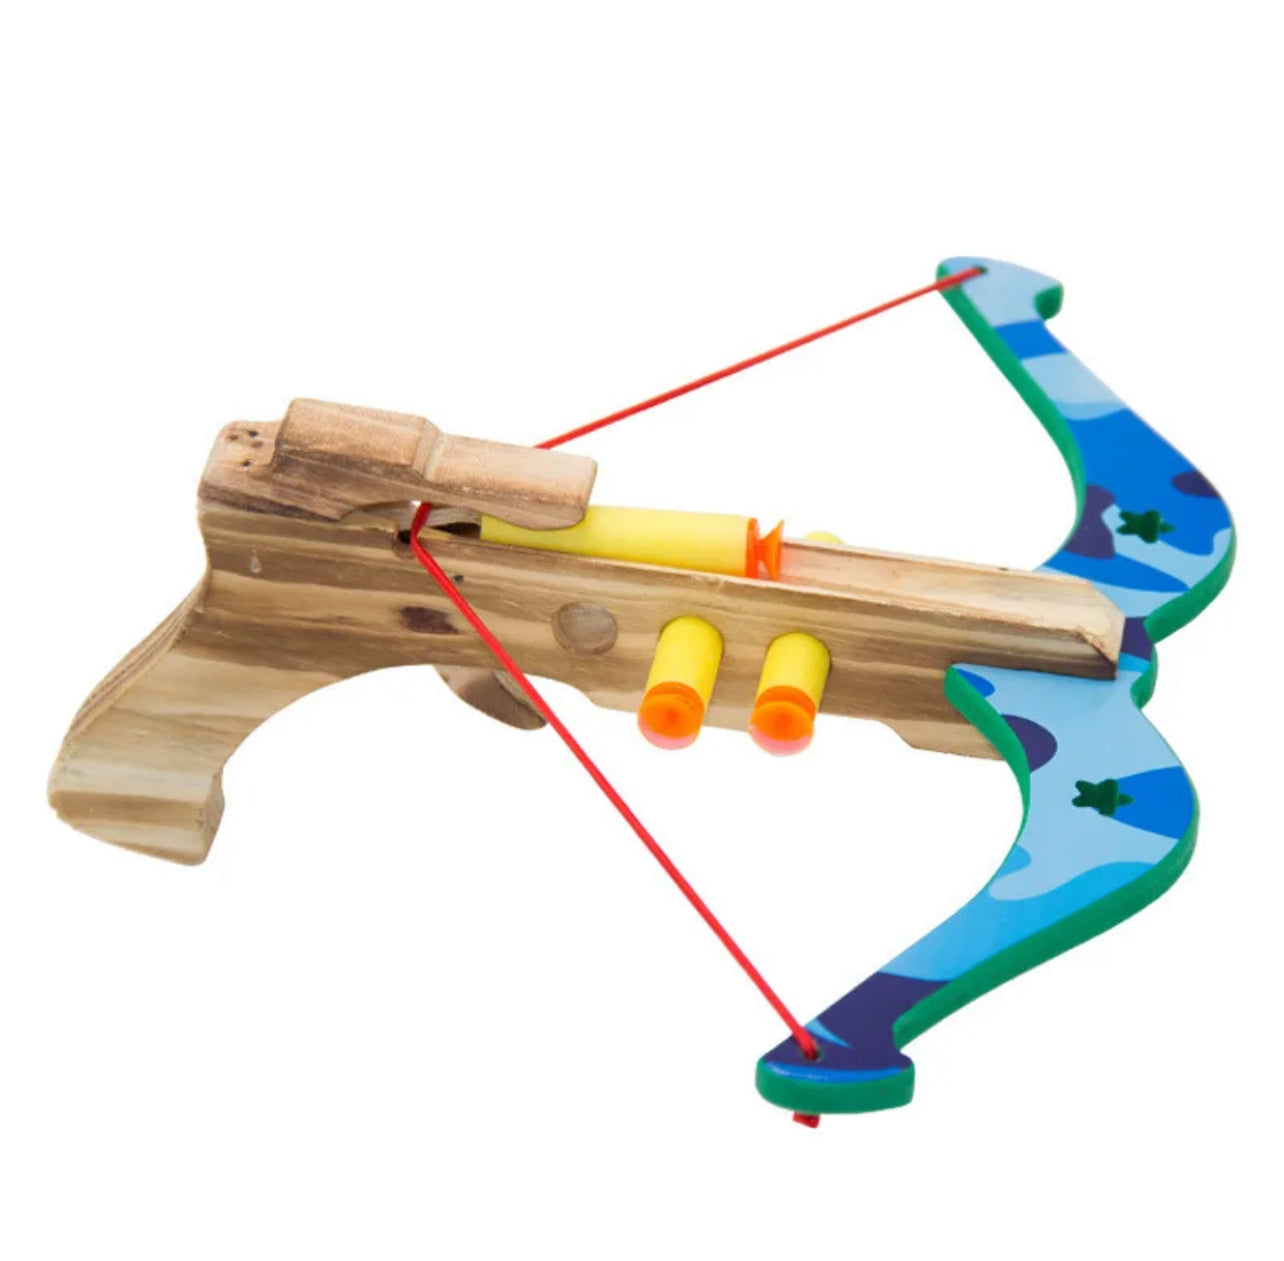 Wooden toy crossbow